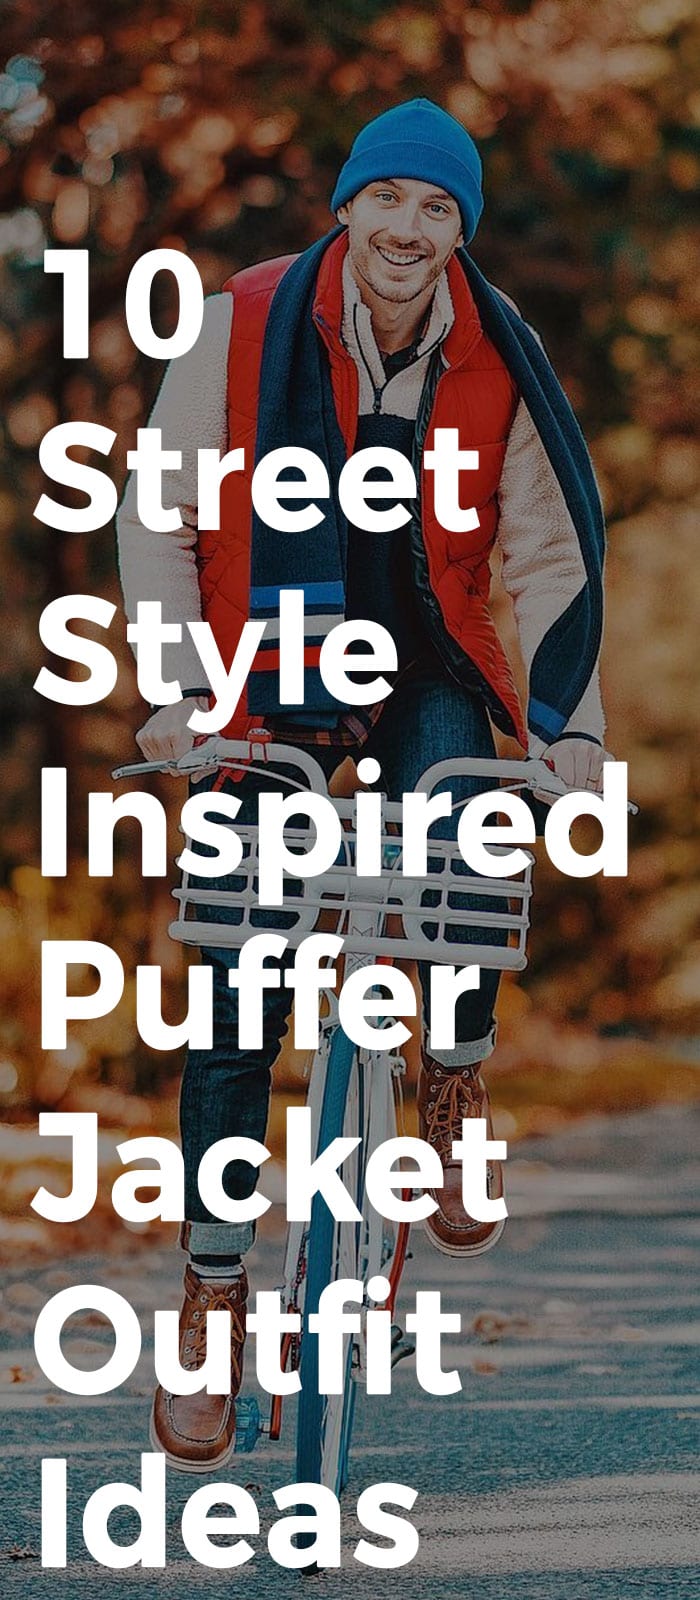 10 Street Style Inspired Puffer Jacket Outfit Ideas